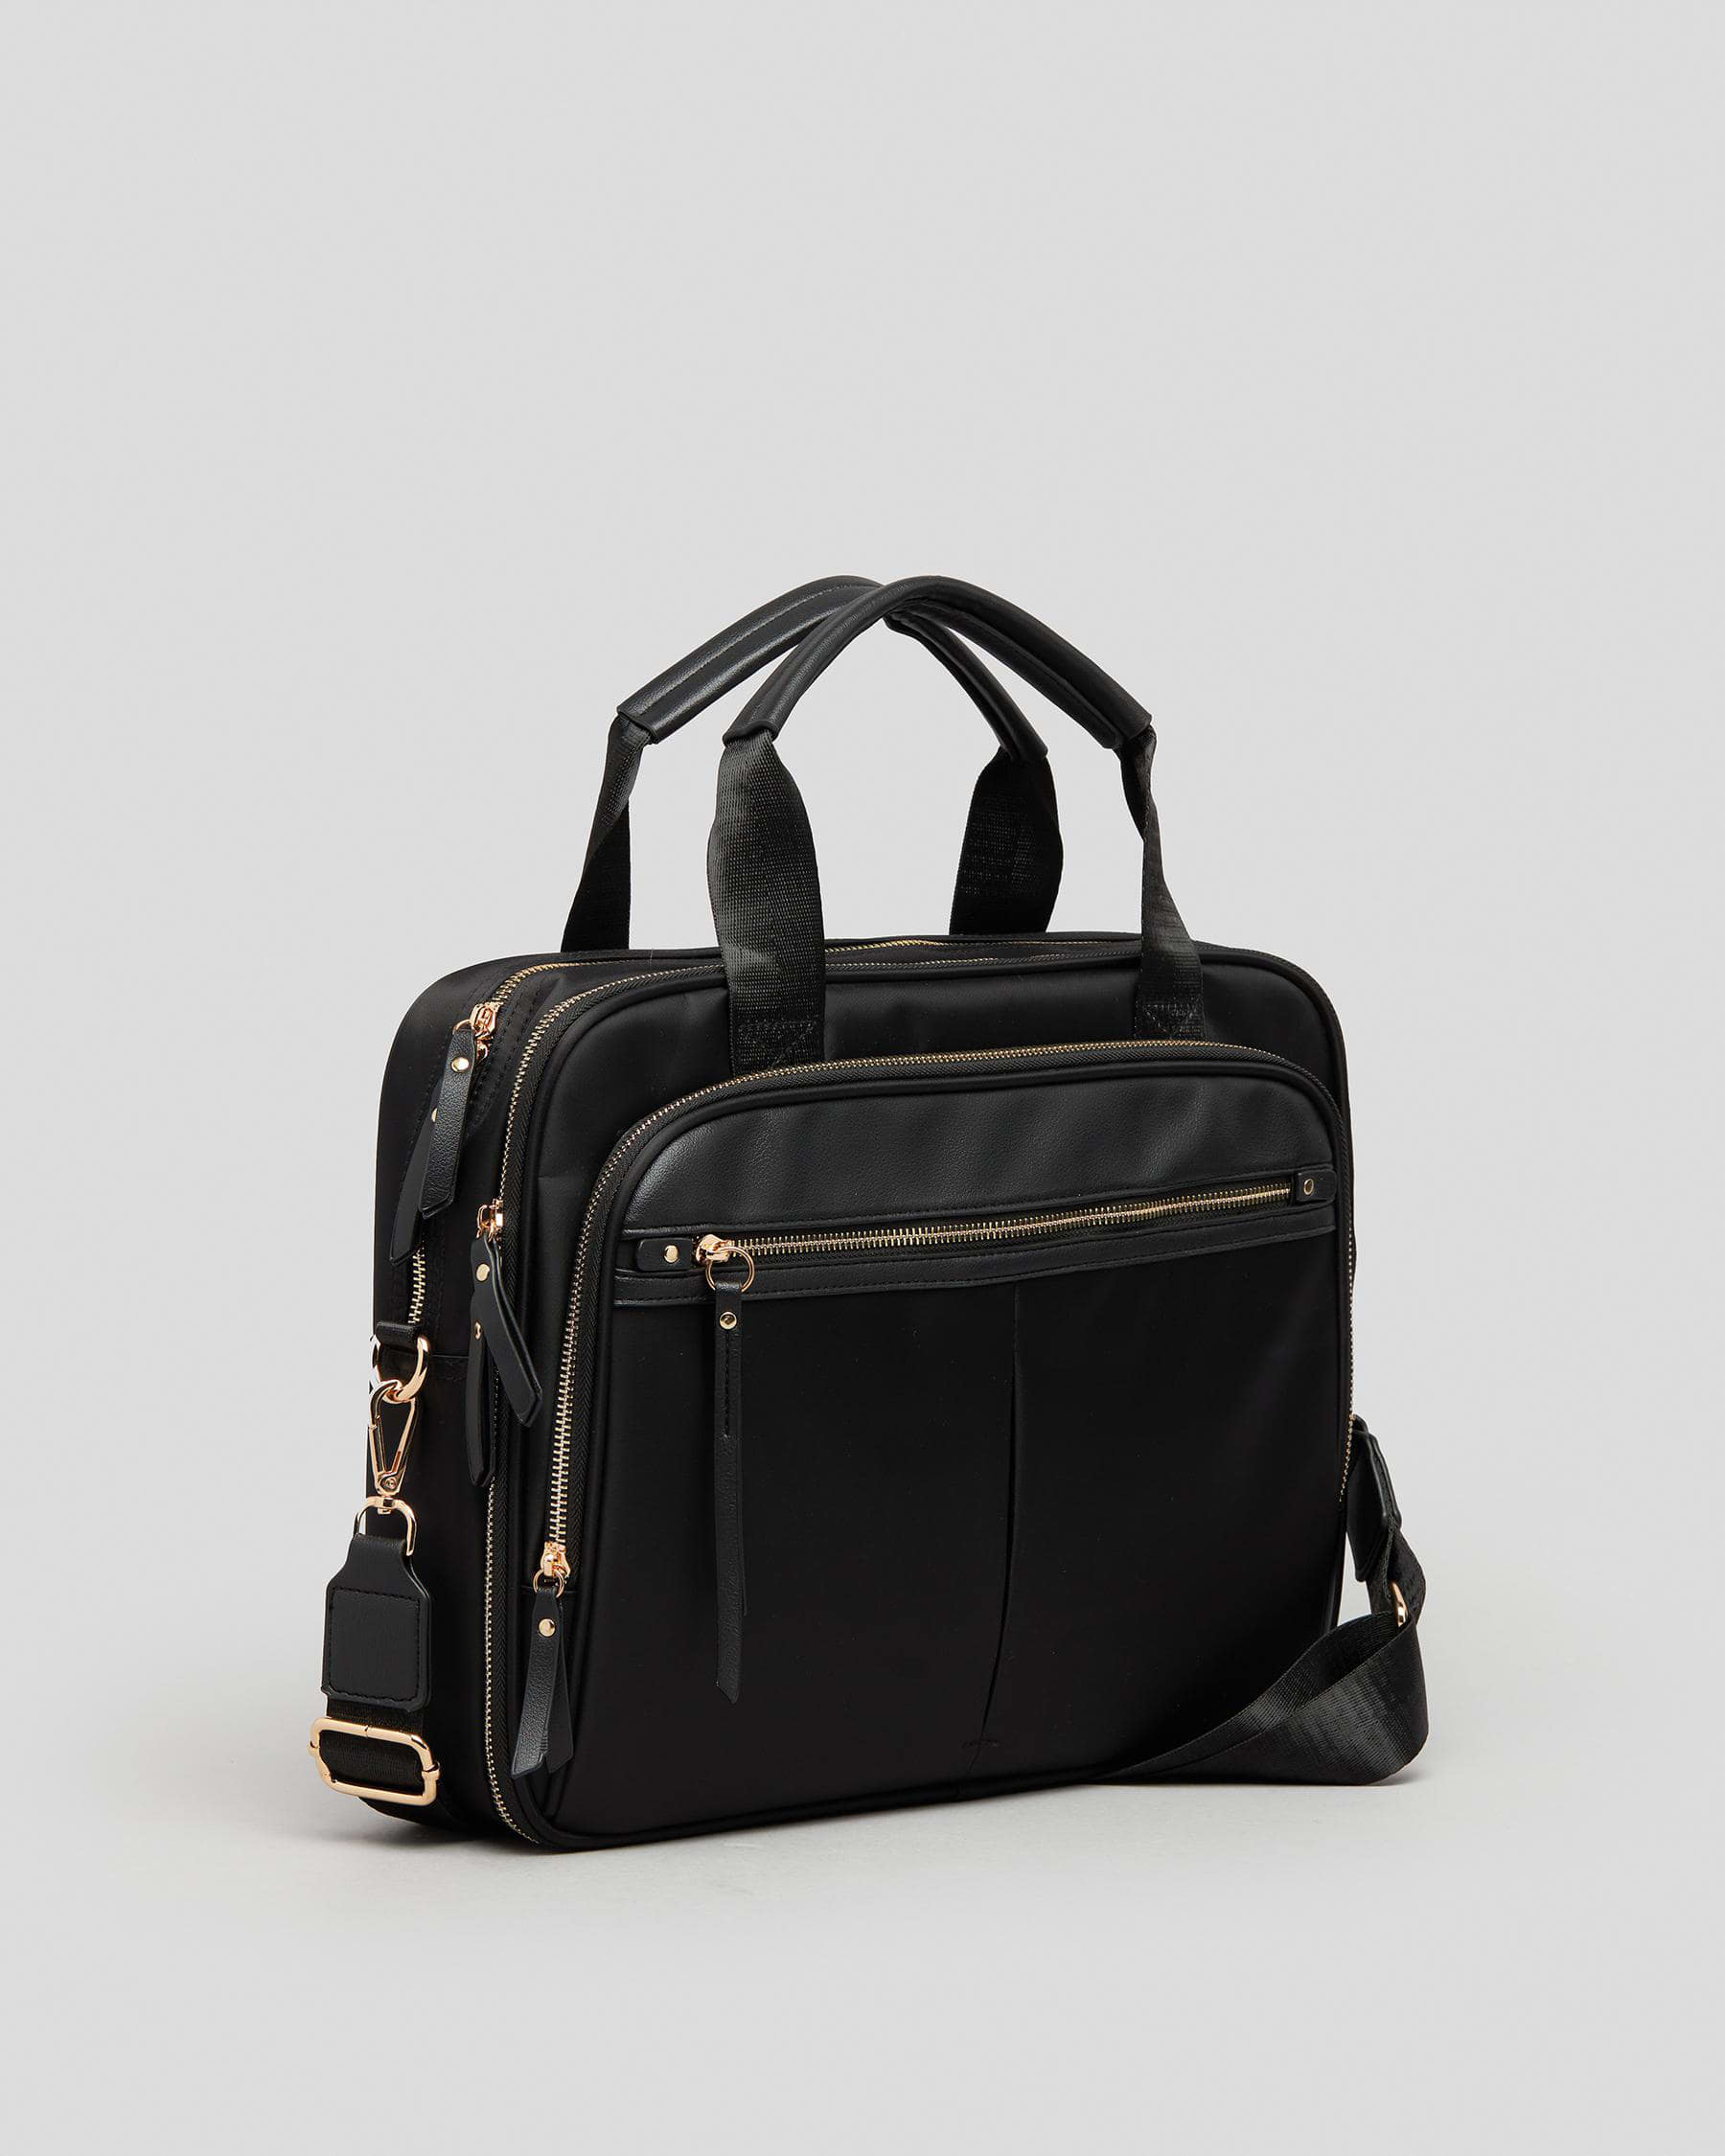 Ava And Ever London Satchel In Black - Fast Shipping & Easy Returns ...